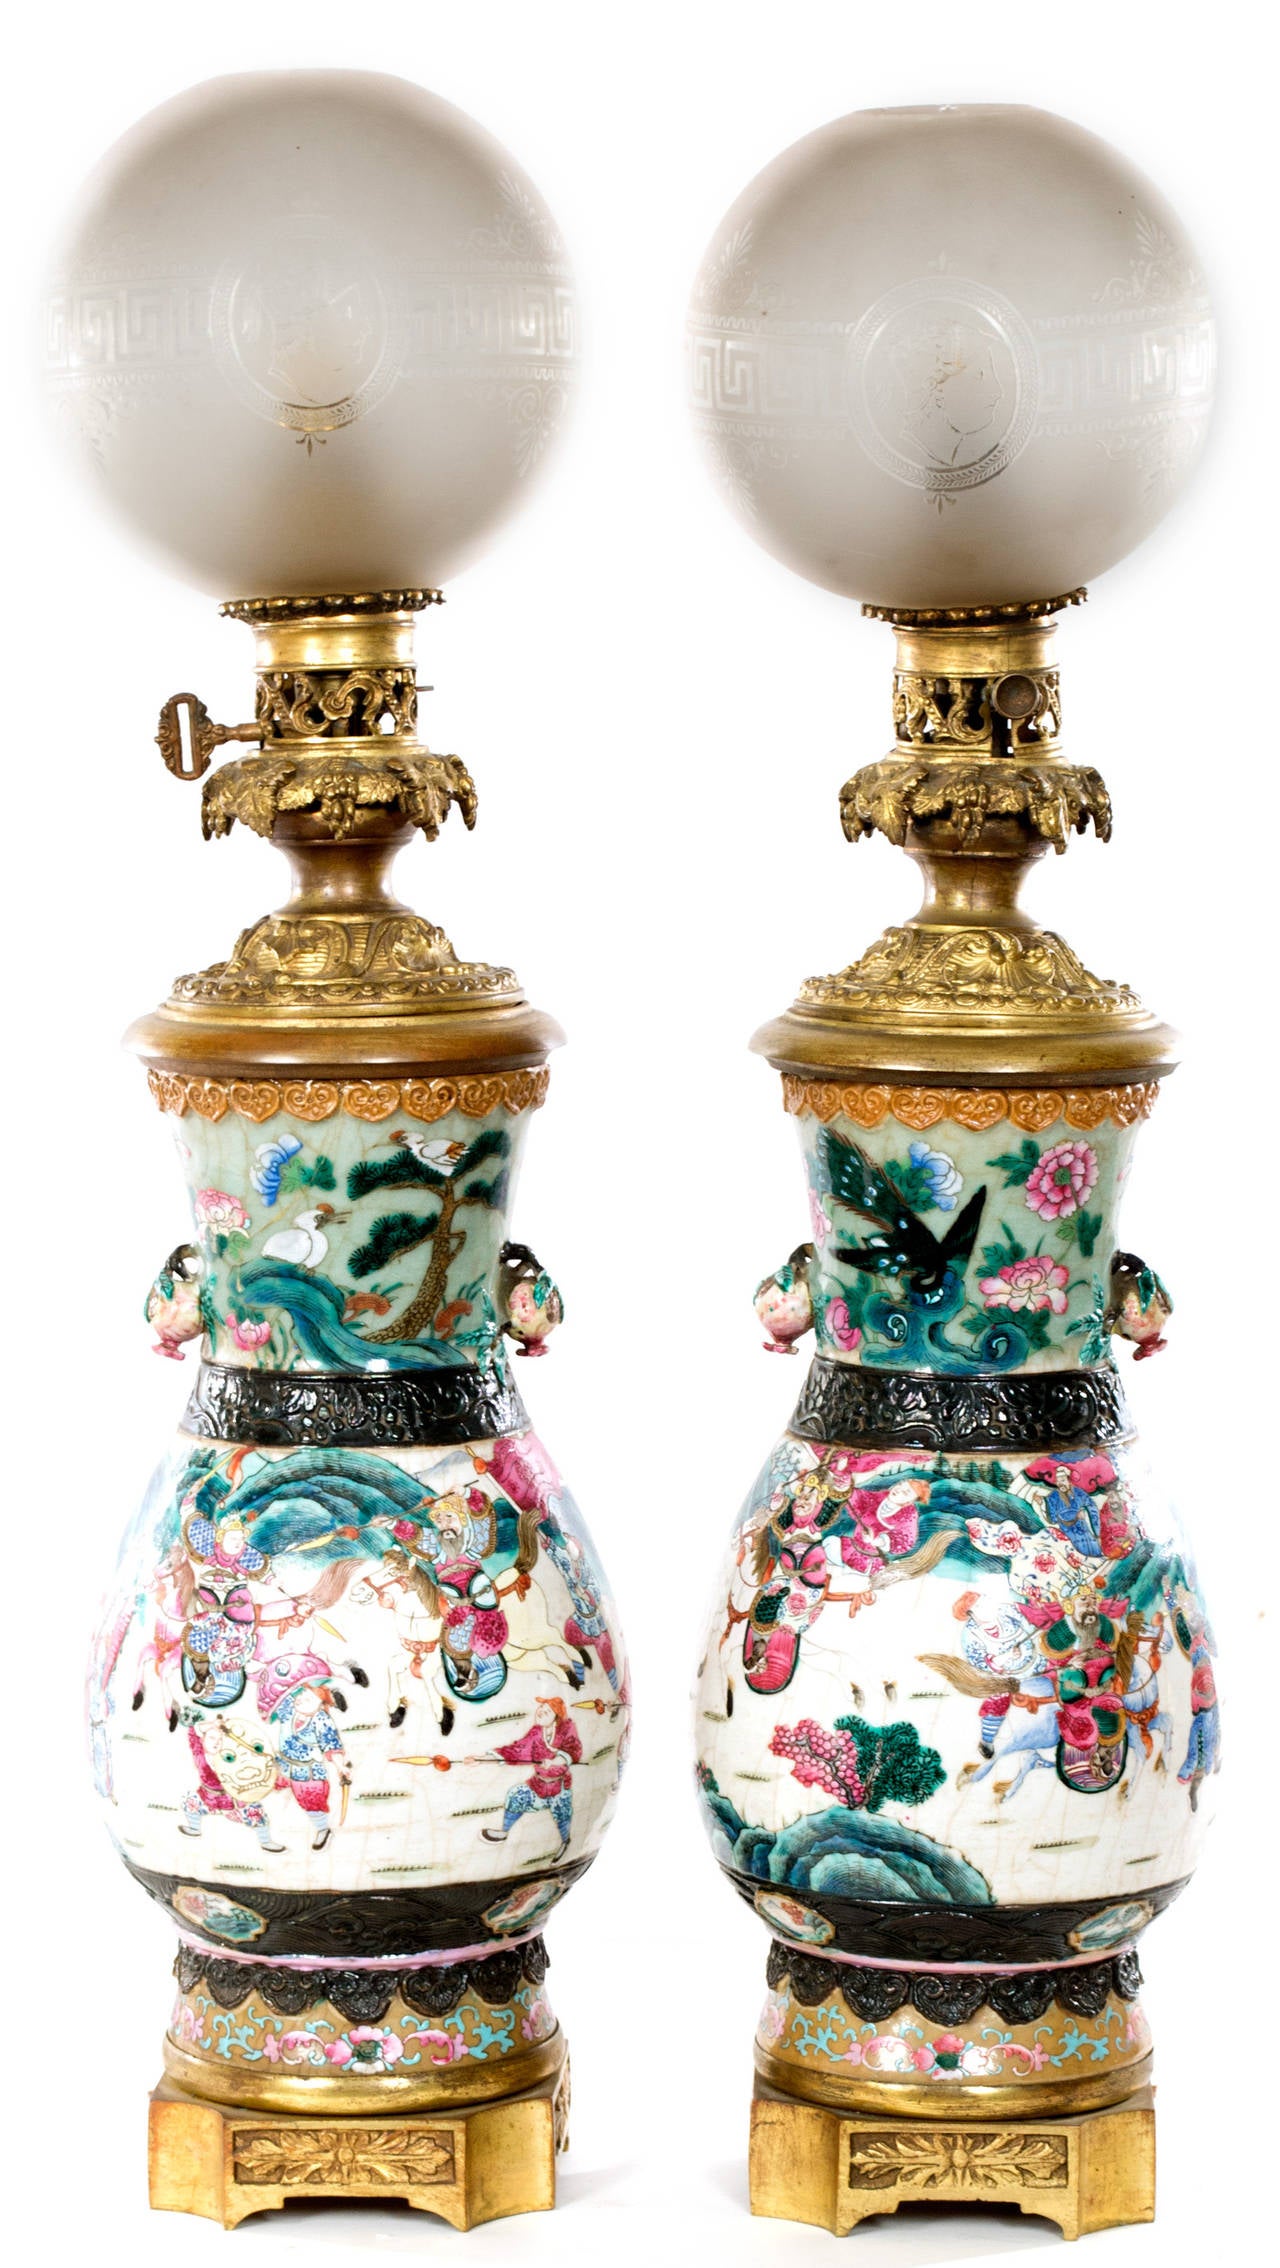 Two famille rose, white ground porcelain vases with polychromed figurative paintings of battle scenes. The vases have been lamped with working ormolu and brass fixtures wired for European sockets and fitted to ormolu bases.